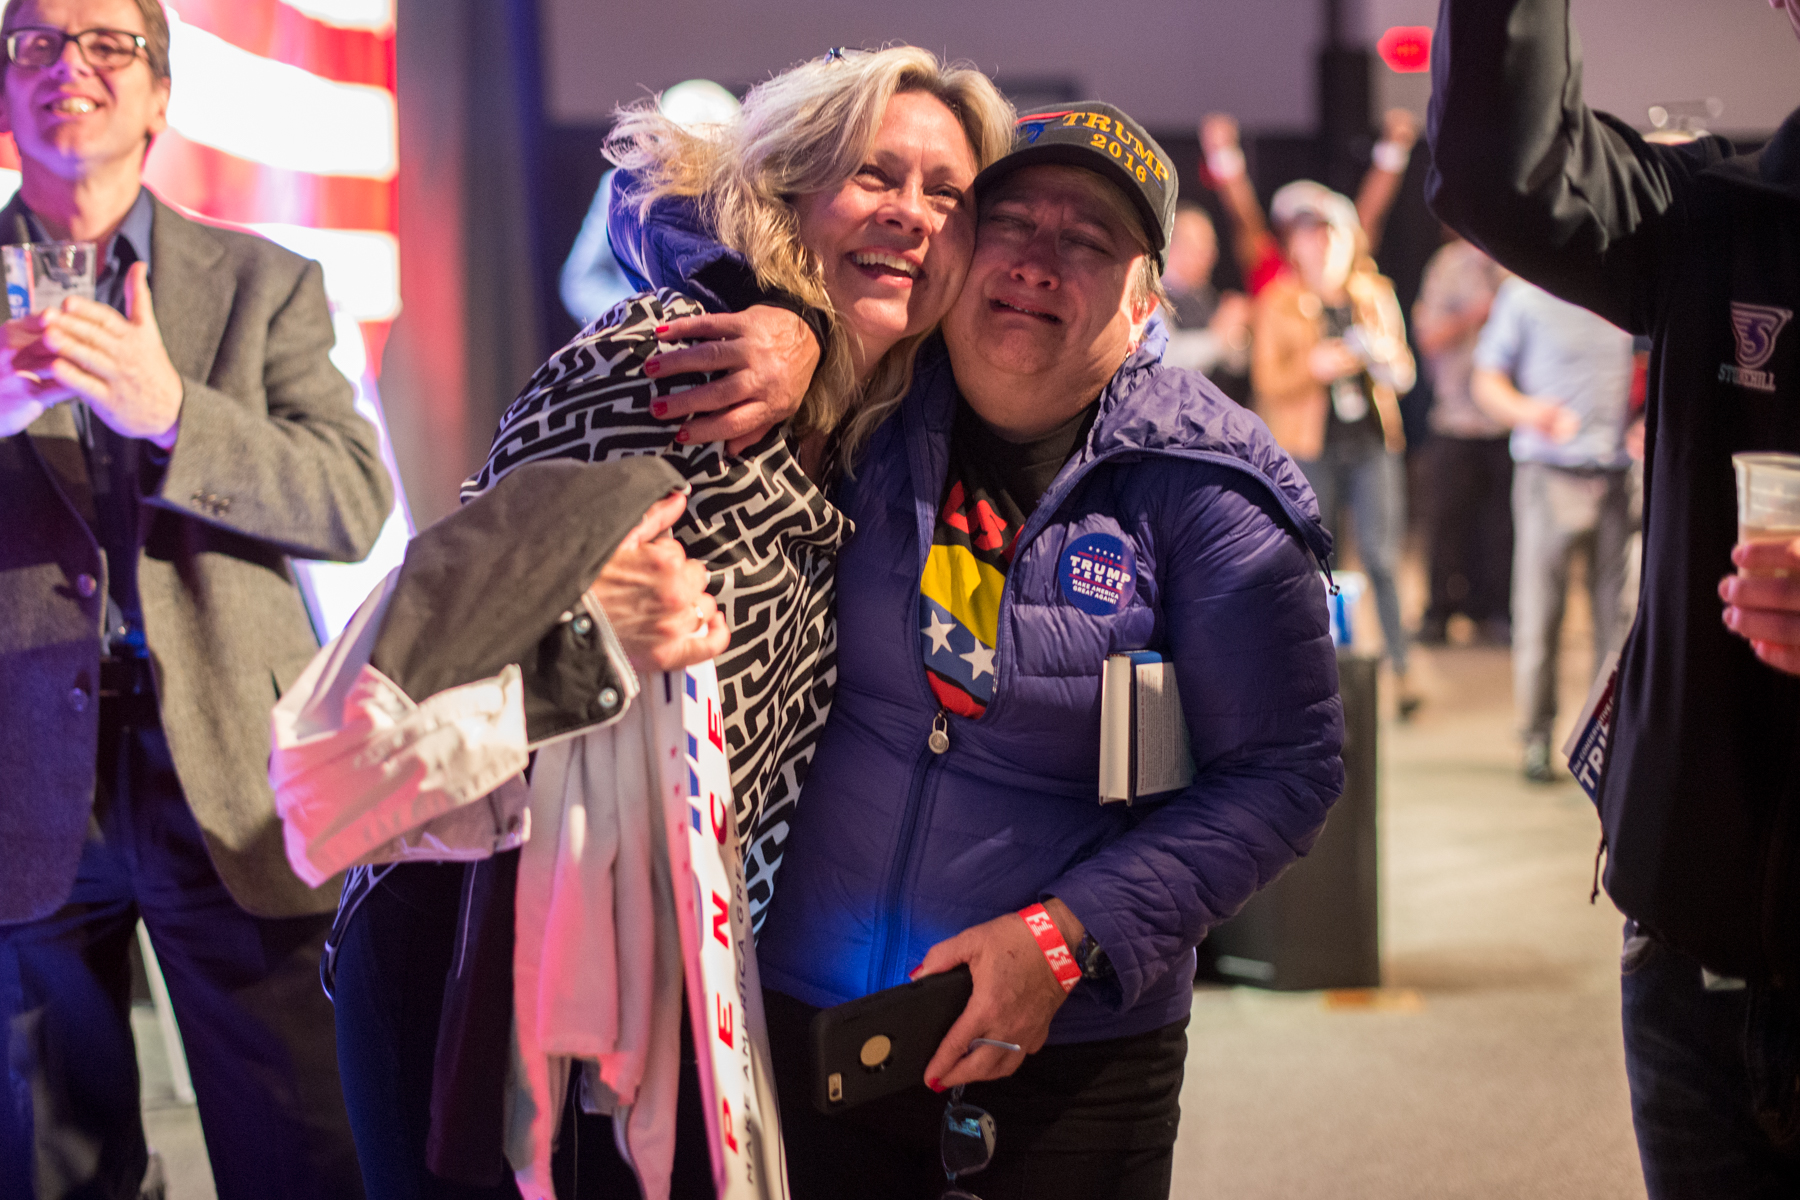 Braintree, MA – Nov. 8, 2016 – Susan Tittle, left, embraces Debbie Makowski as United States presidential election results are reported on Fox News during the Massachusetts Trump-Pence Campaign victory party. Trump supporters gathered at the F1 Boston race track to cheer on their nominee as he was elected 45th president of the United States.